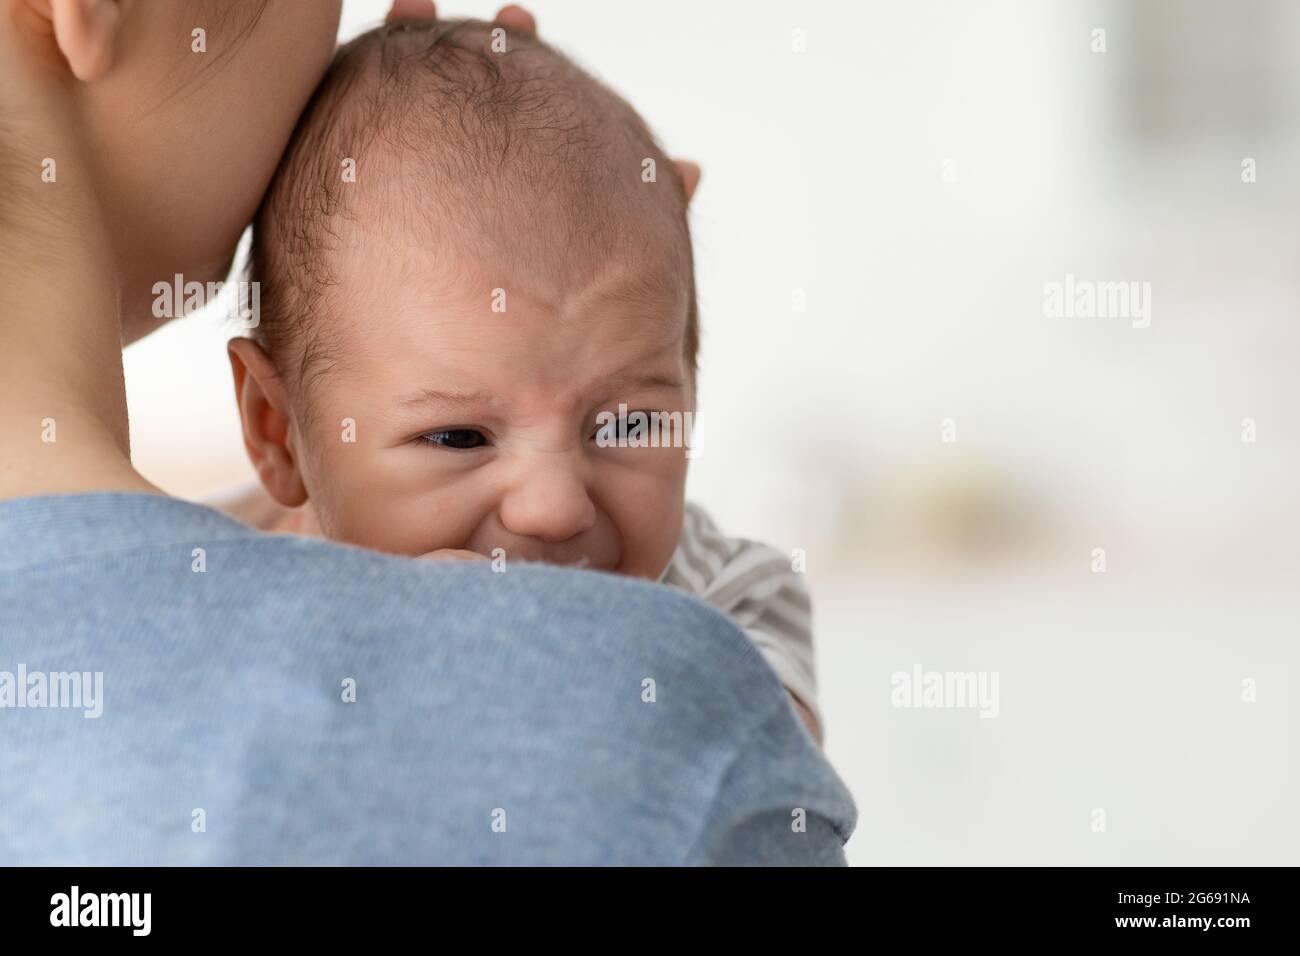 Baby Behavior. Closeup Portrait Of Young Mother Comforting Her Crying Infant Child Stock Photo